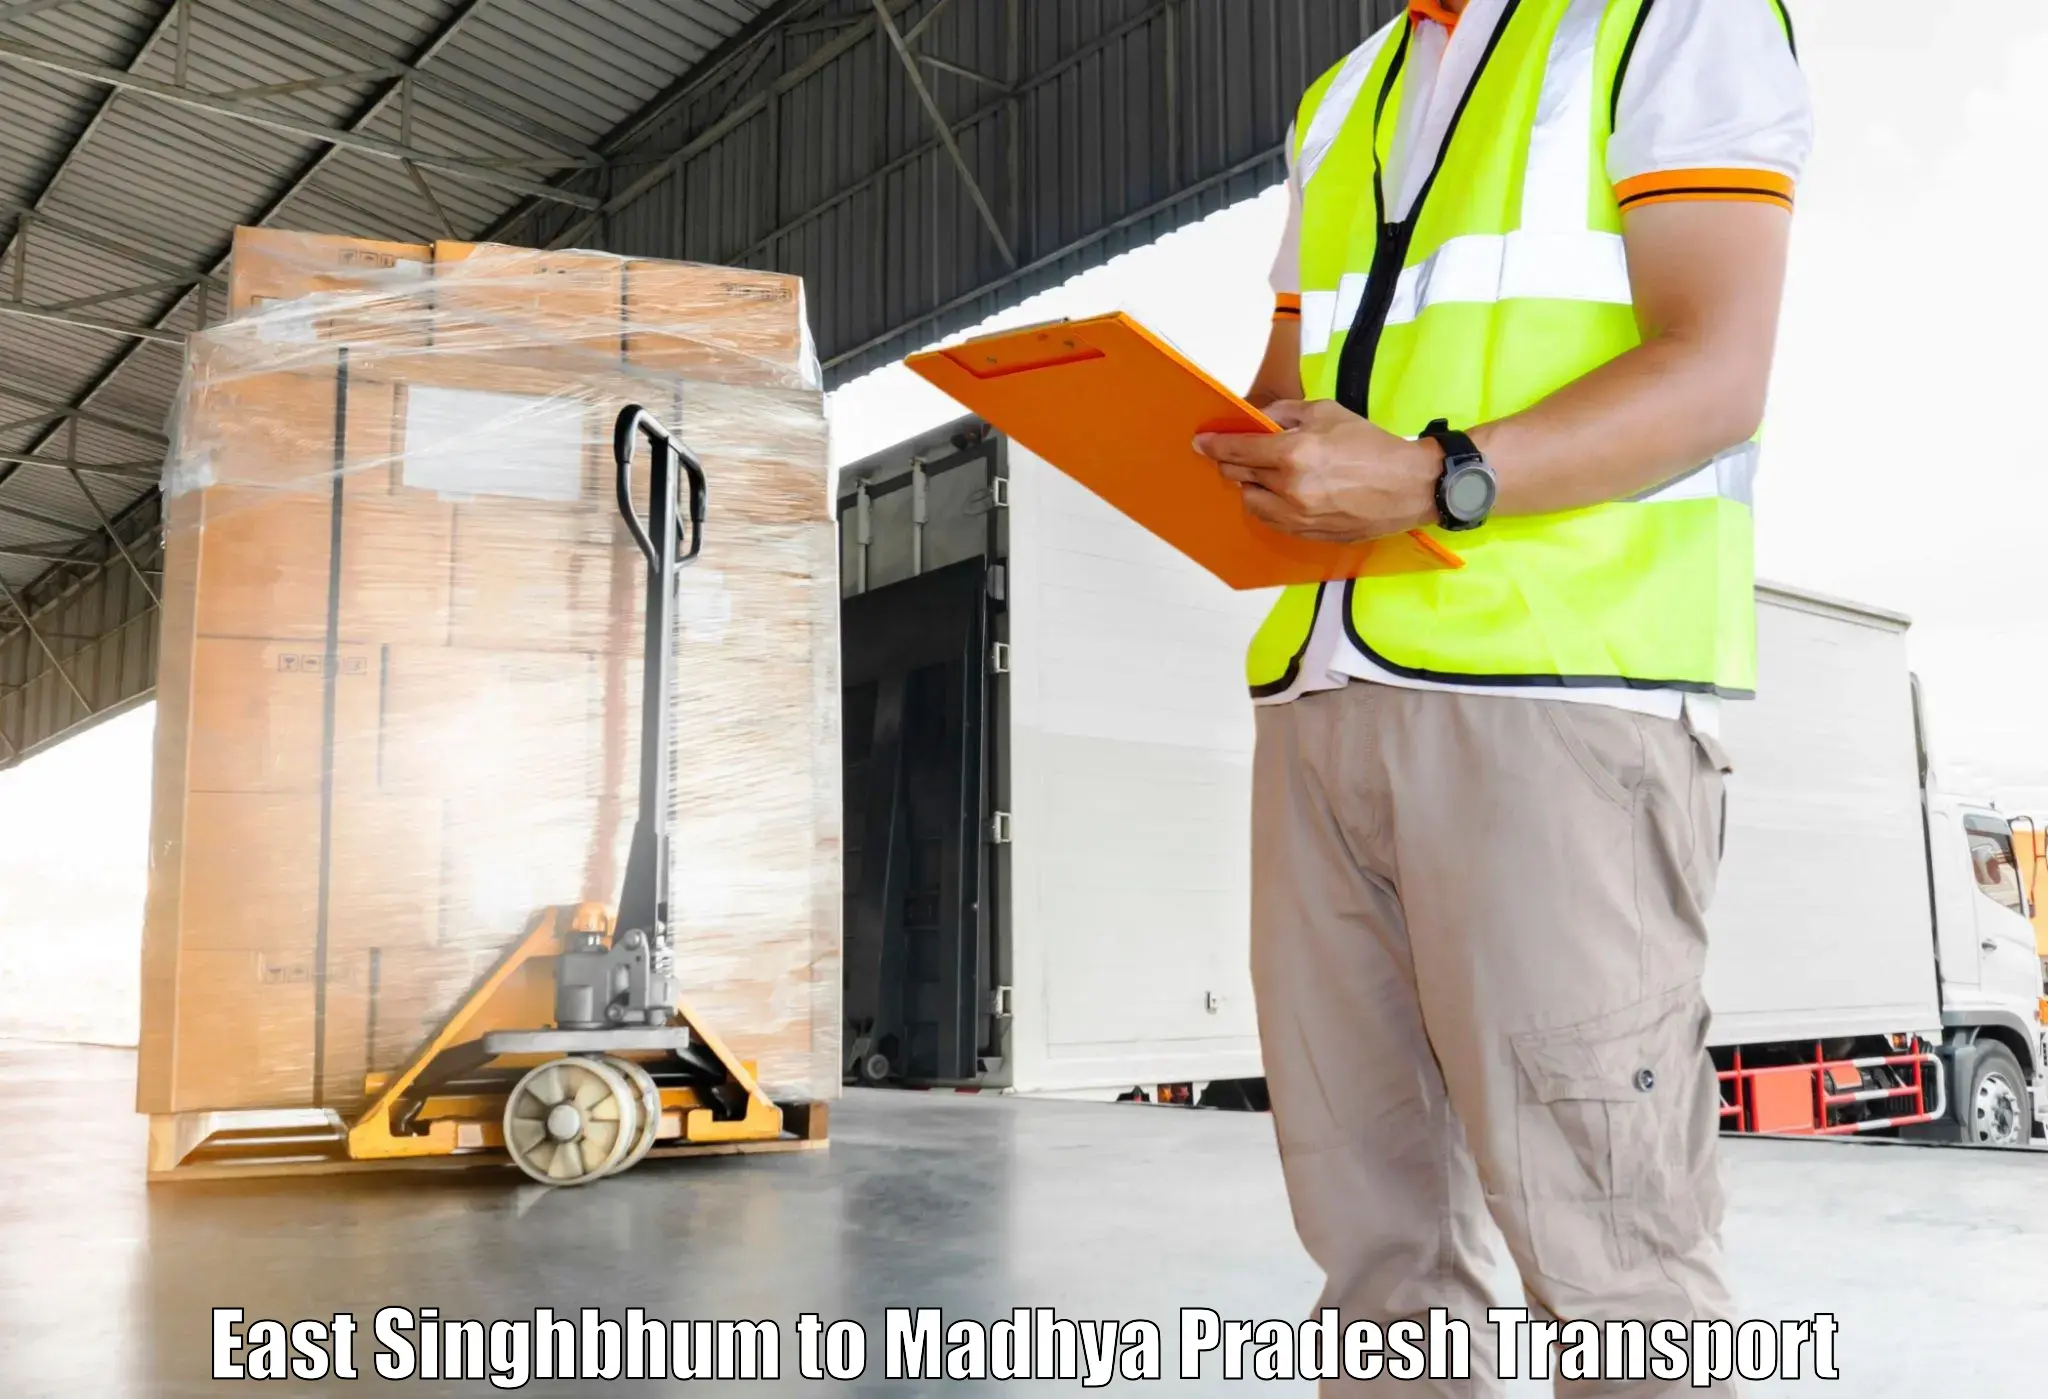 Vehicle transport services in East Singhbhum to IIIT Bhopal